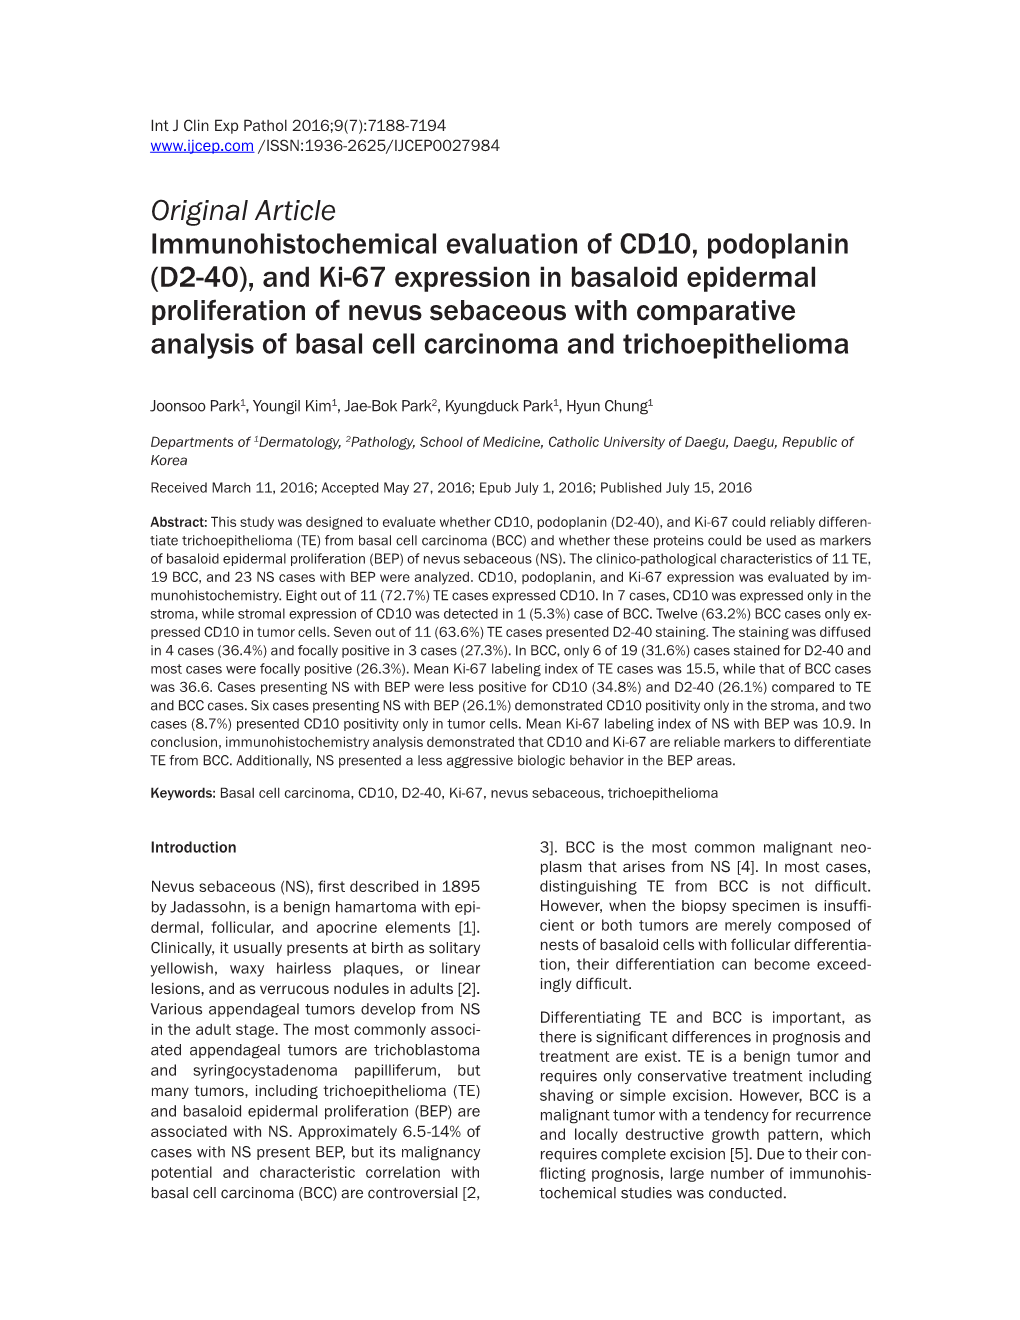 Original Article Immunohistochemical Evaluation of CD10, Podoplanin (D2-40), and Ki-67 Expression in Basaloid Epidermal Prolifer